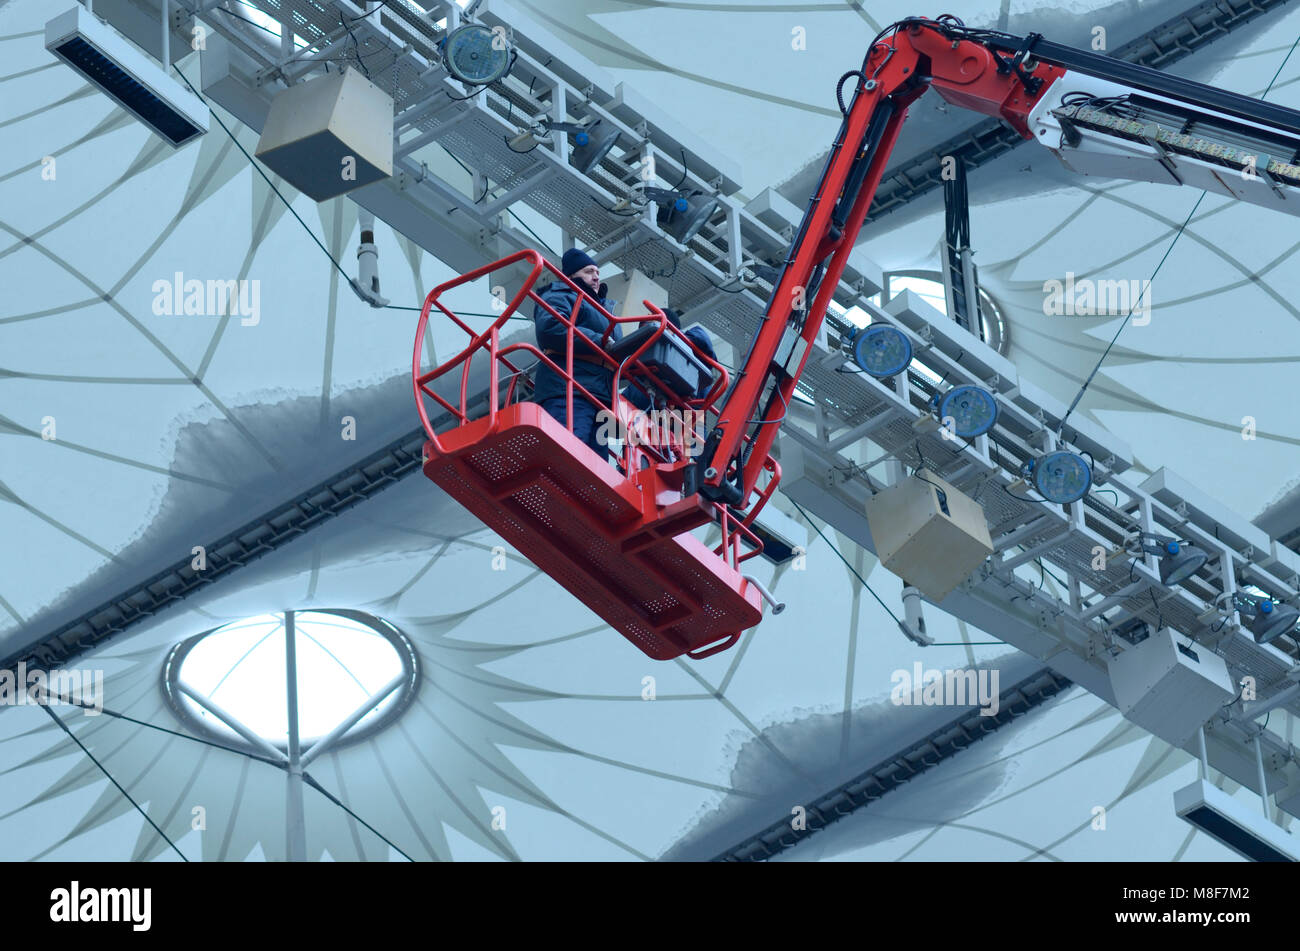 Workers repair sports lighting fixtures of the Olympic National Sports Complex stadium using boom lift. March 16, 2018. Kiev, Ukraine Stock Photo